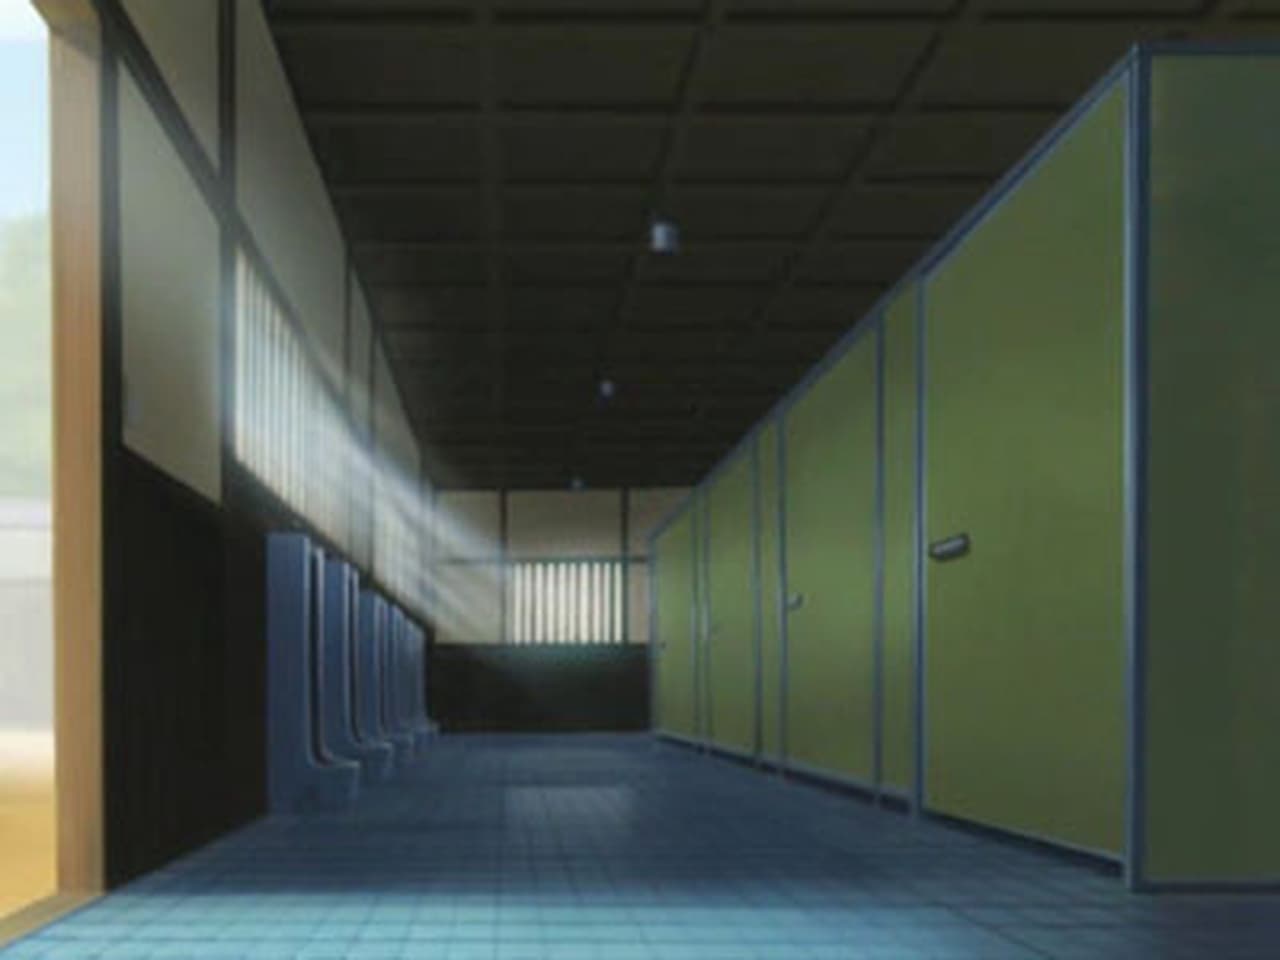 Gintama - Season 2 Episode 30 : Four Heads are Better than One